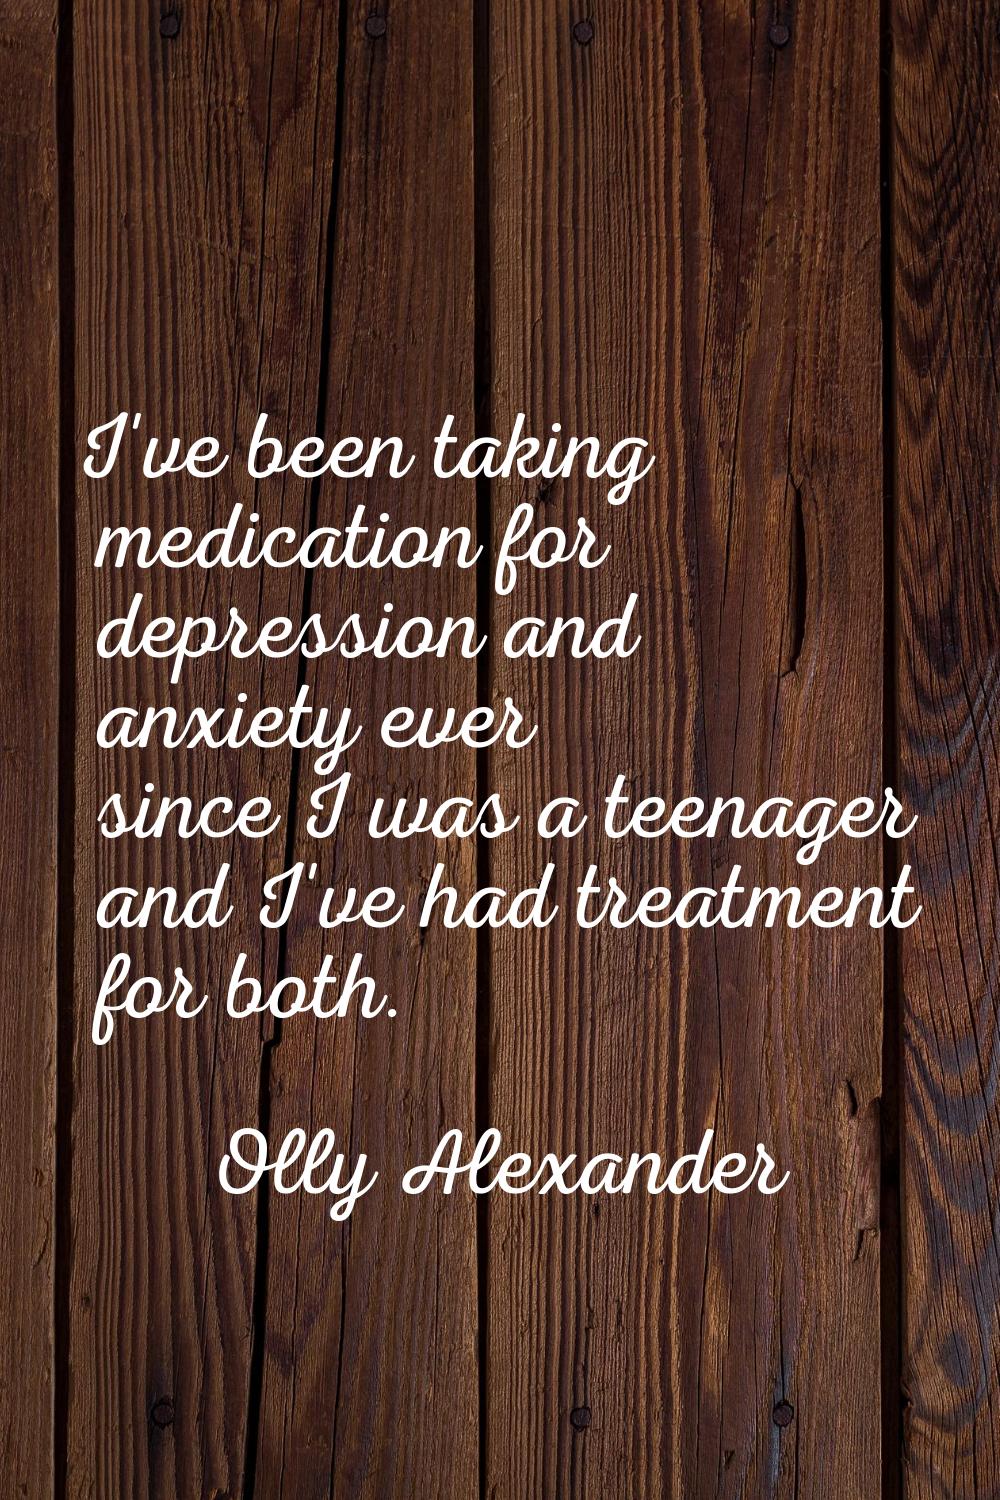 I've been taking medication for depression and anxiety ever since I was a teenager and I've had tre